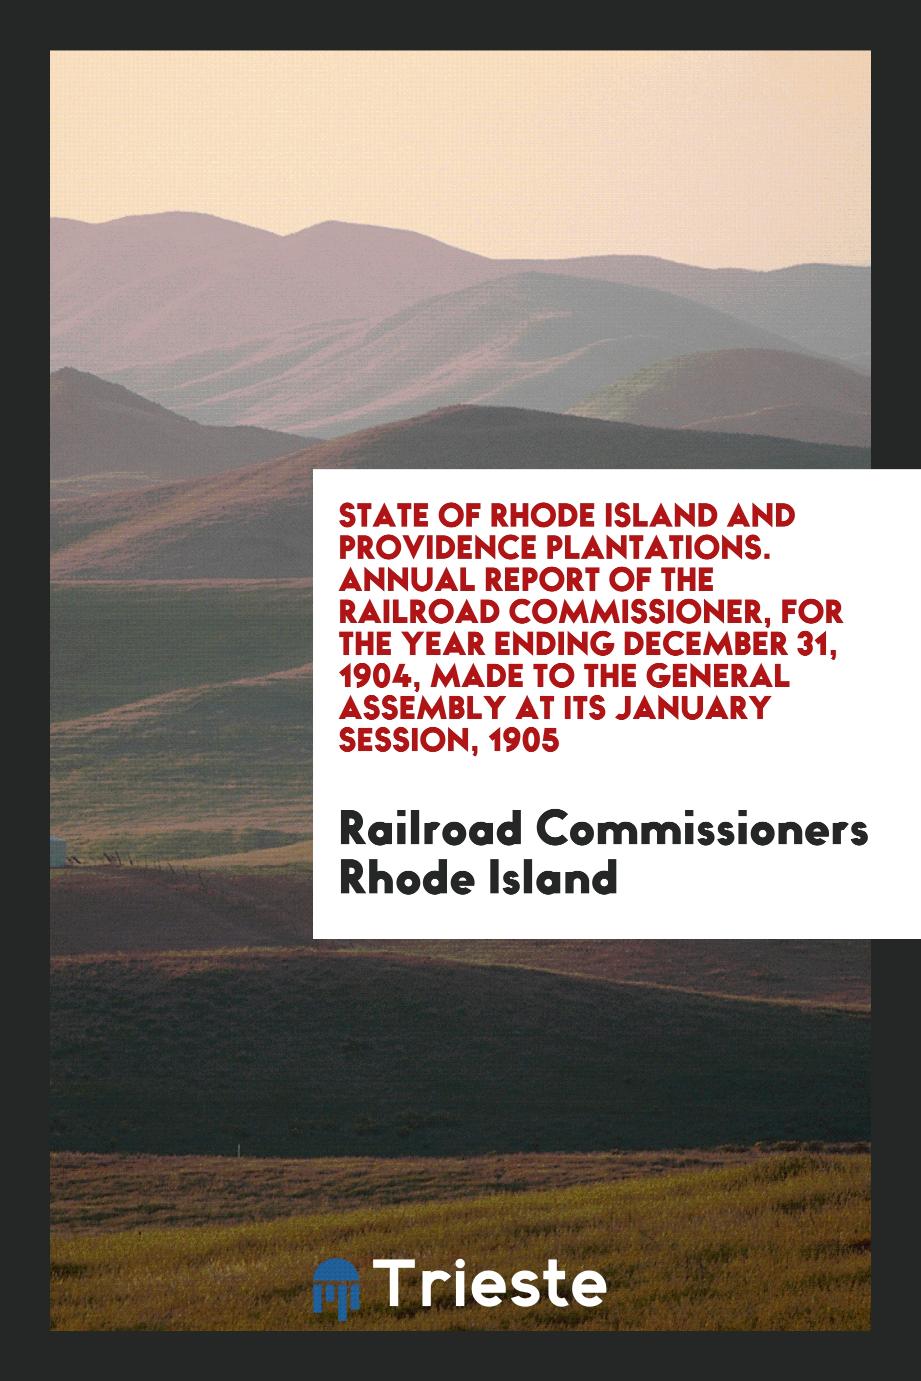 State of Rhode Island and Providence Plantations. Annual Report of the Railroad Commissioner, for the Year Ending December 31, 1904, Made to the General Assembly at Its January Session, 1905